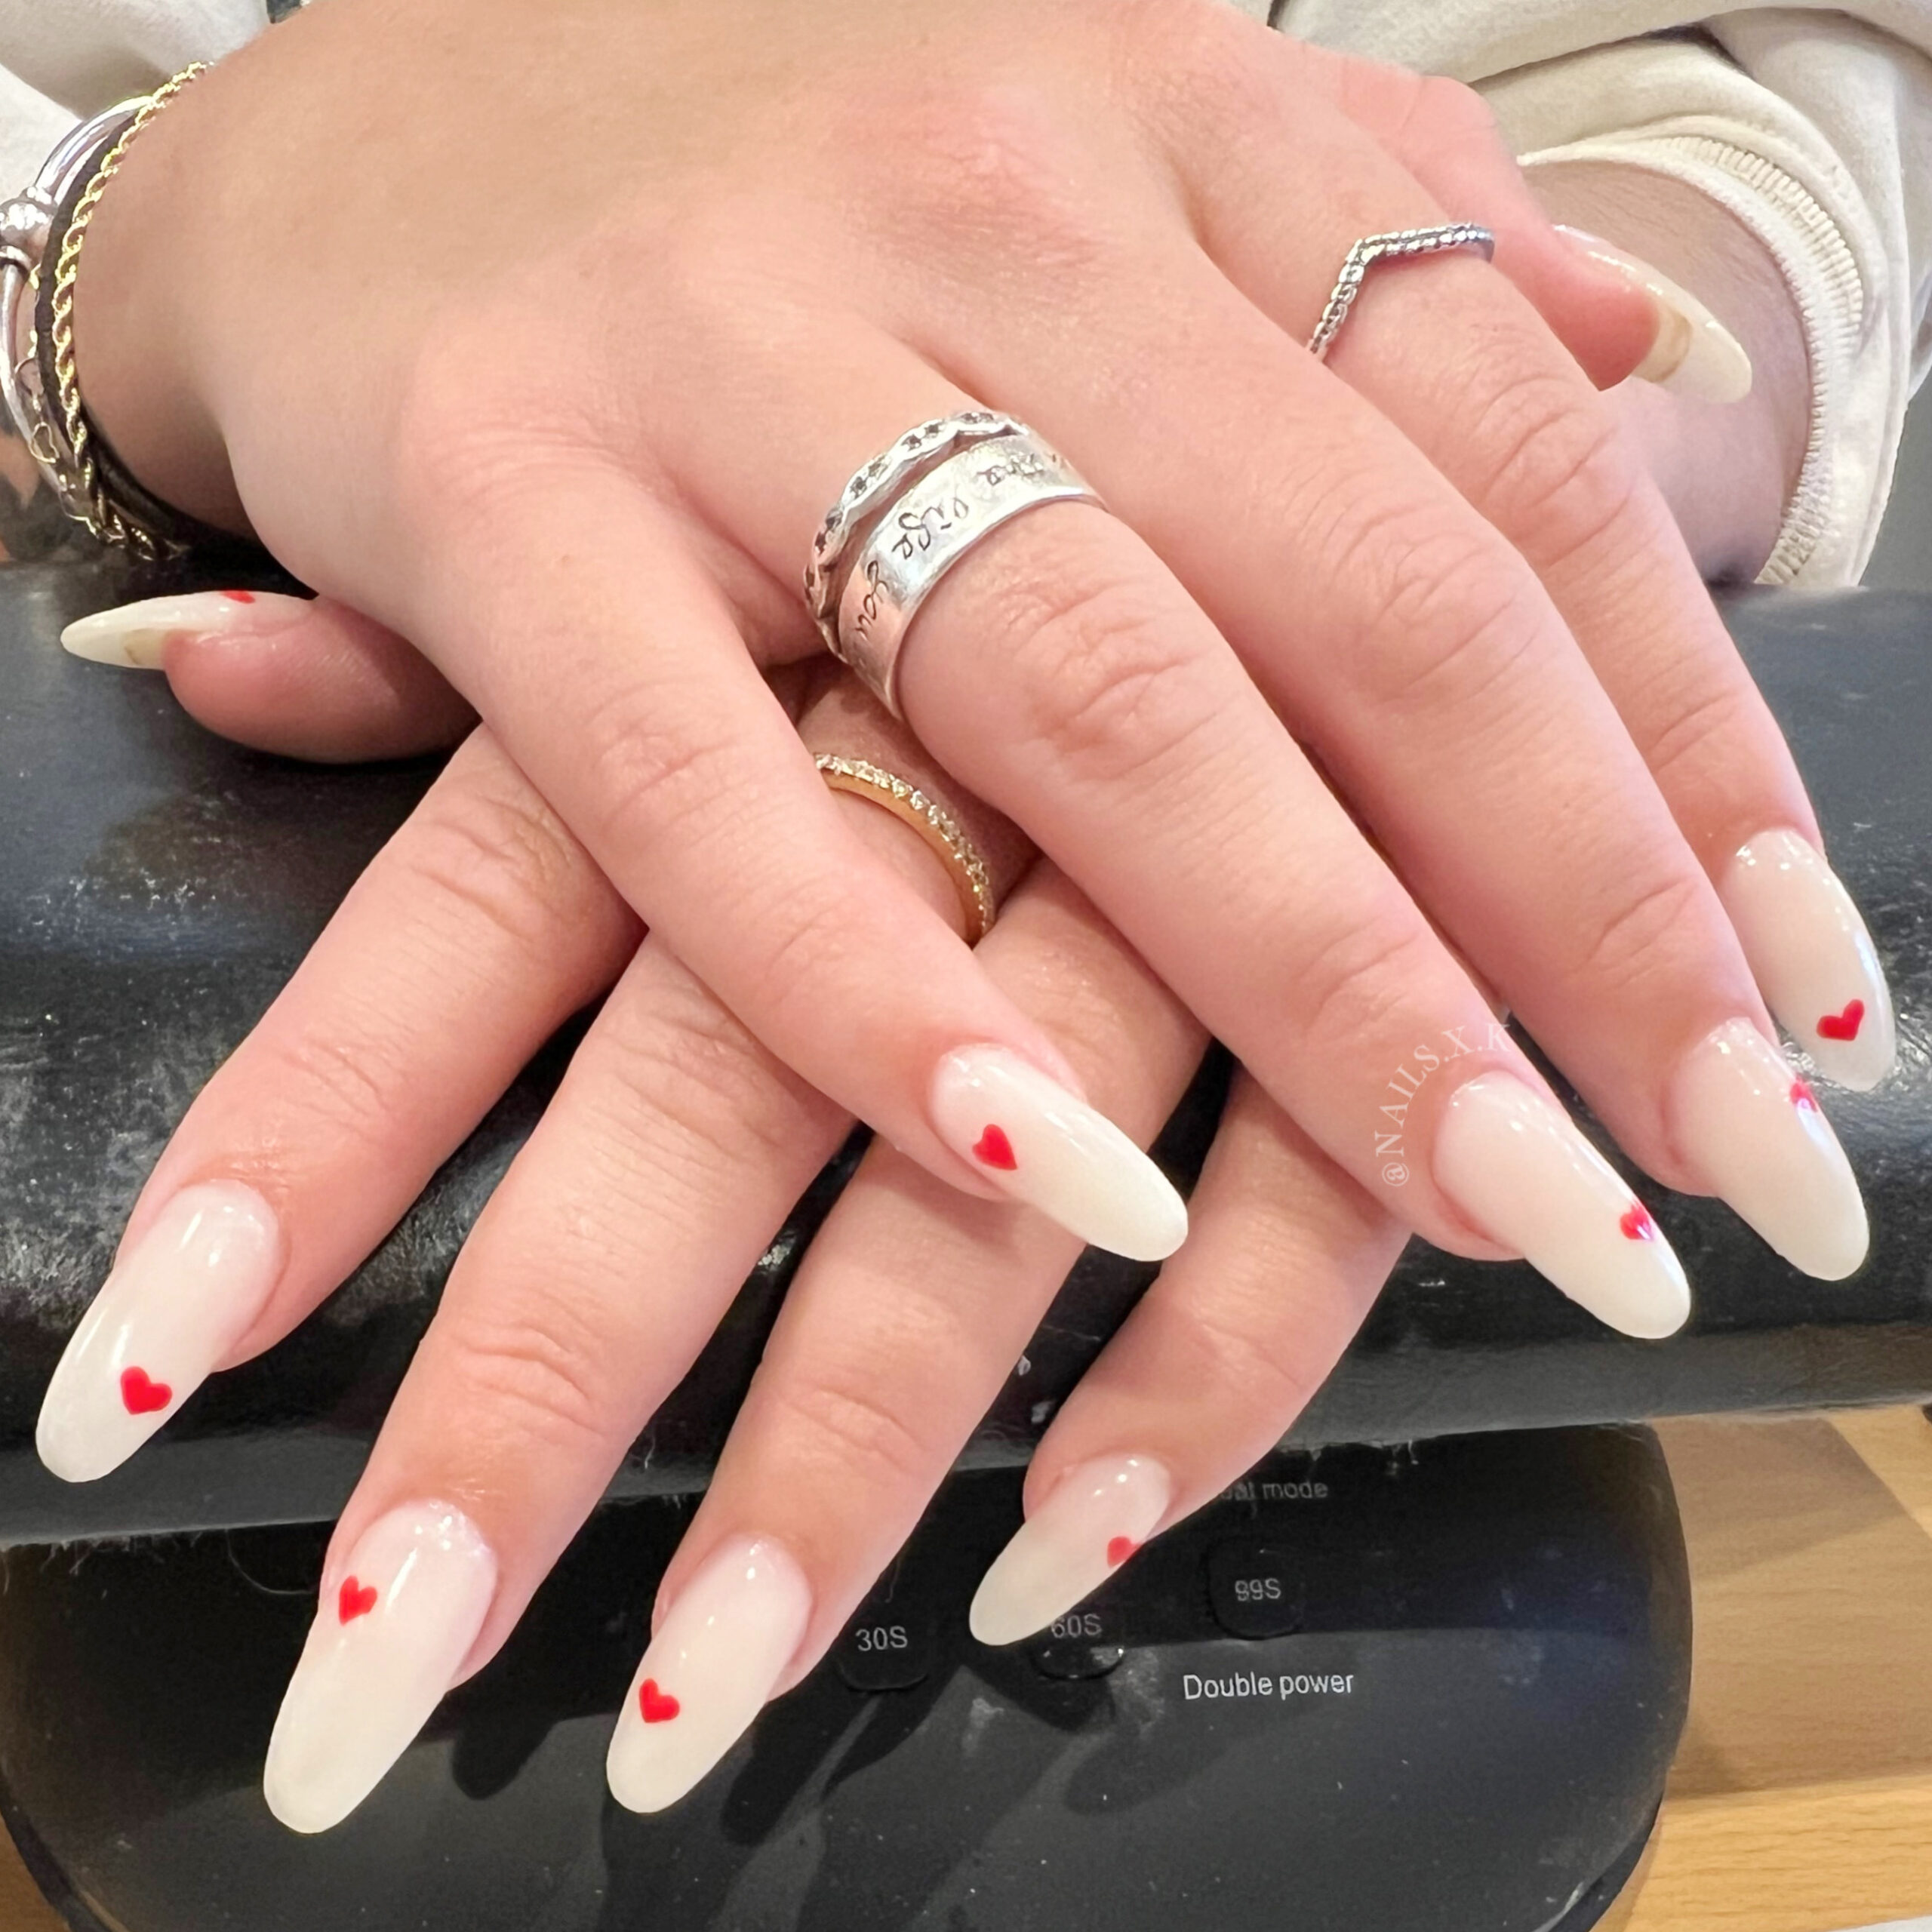 Acrylic nails with milky white color and tiny hand painted red hearts. Nails by K